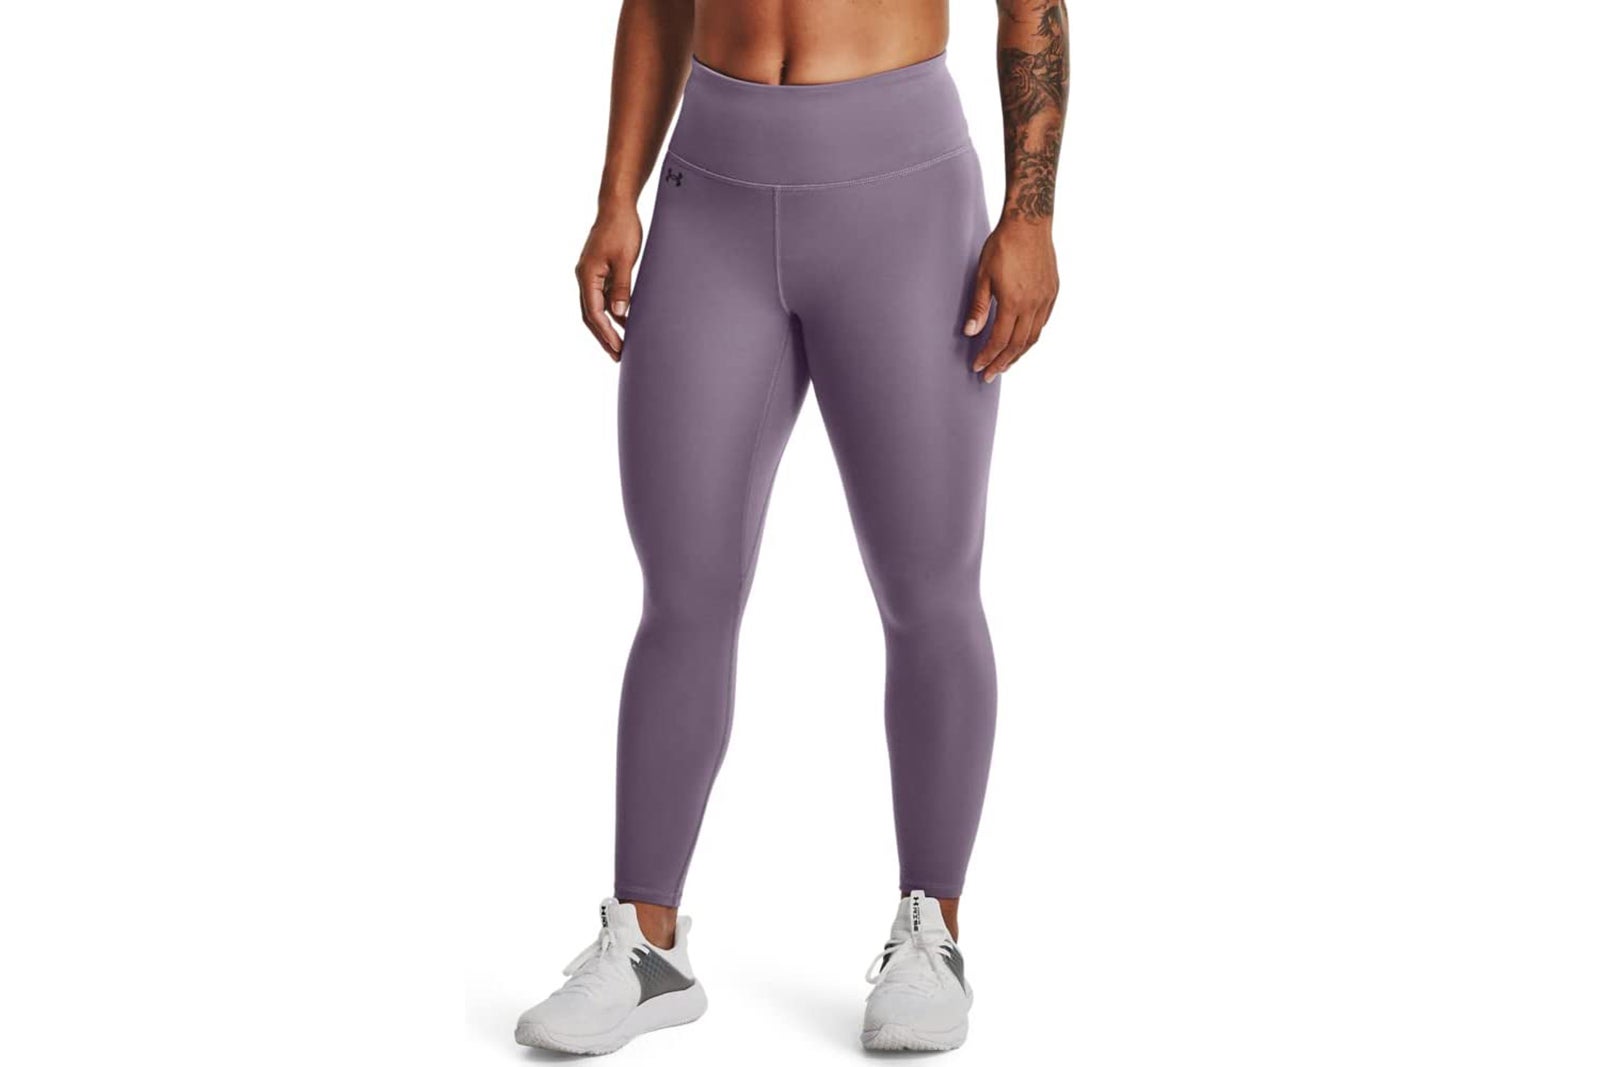 Best travel pants for women - The Points Guy